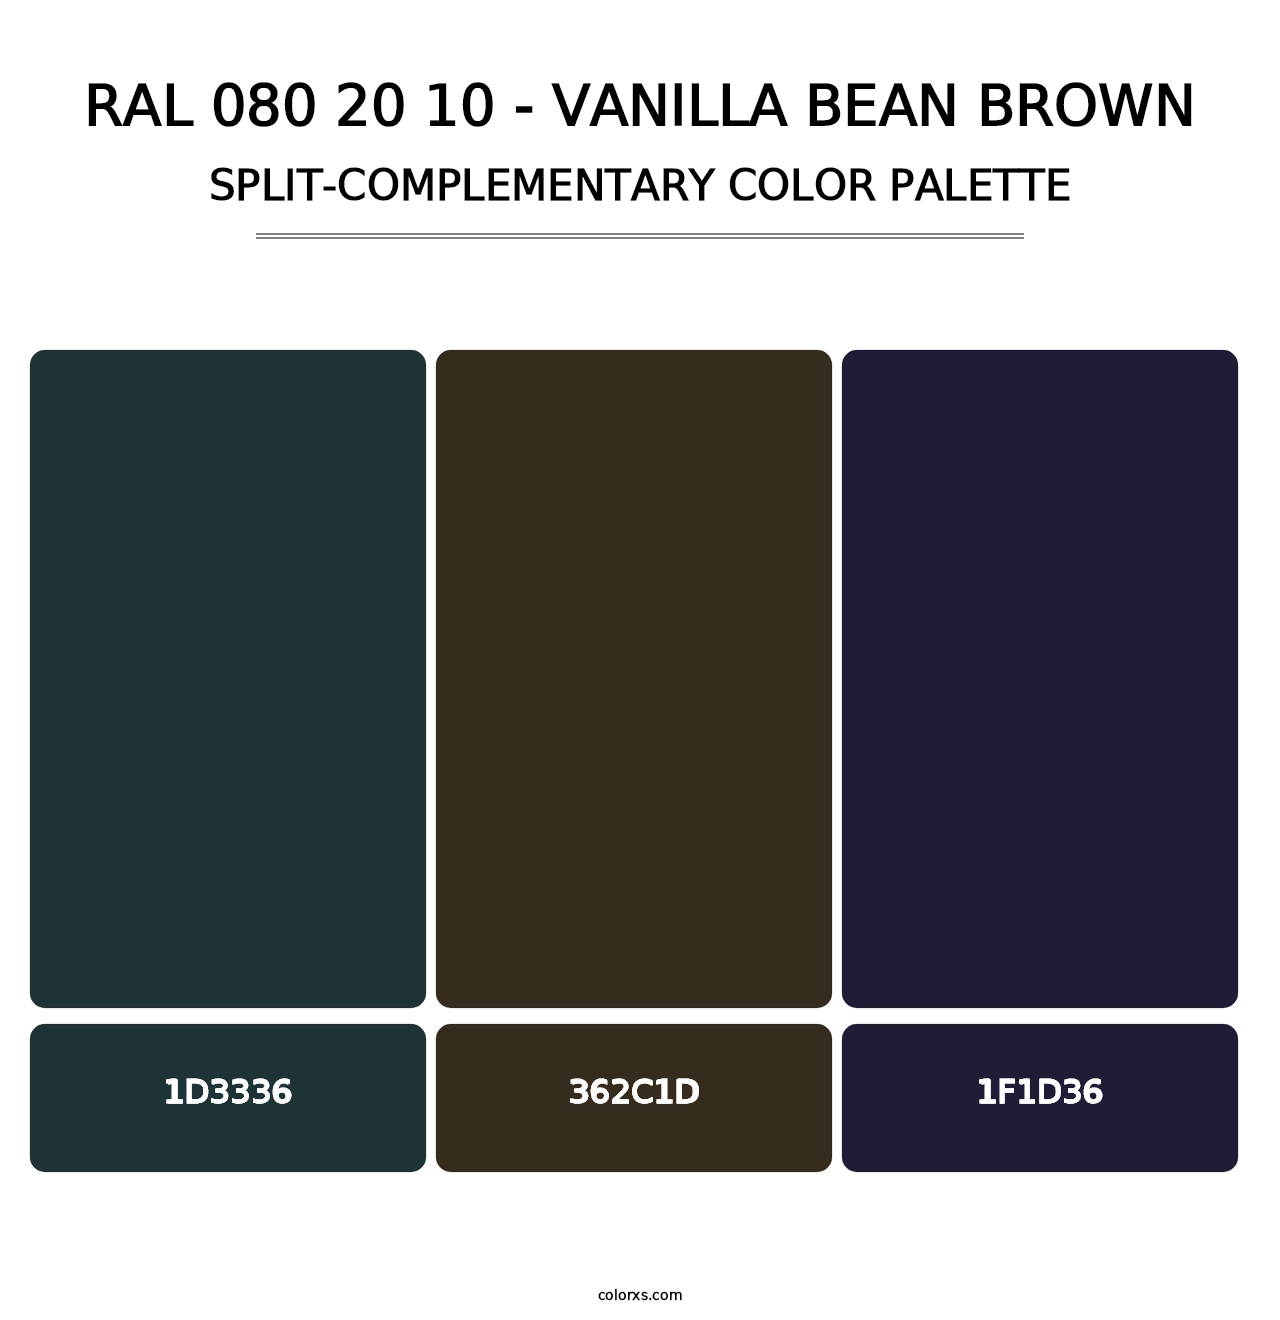 RAL 080 20 10 - Vanilla Bean Brown - Split-Complementary Color Palette